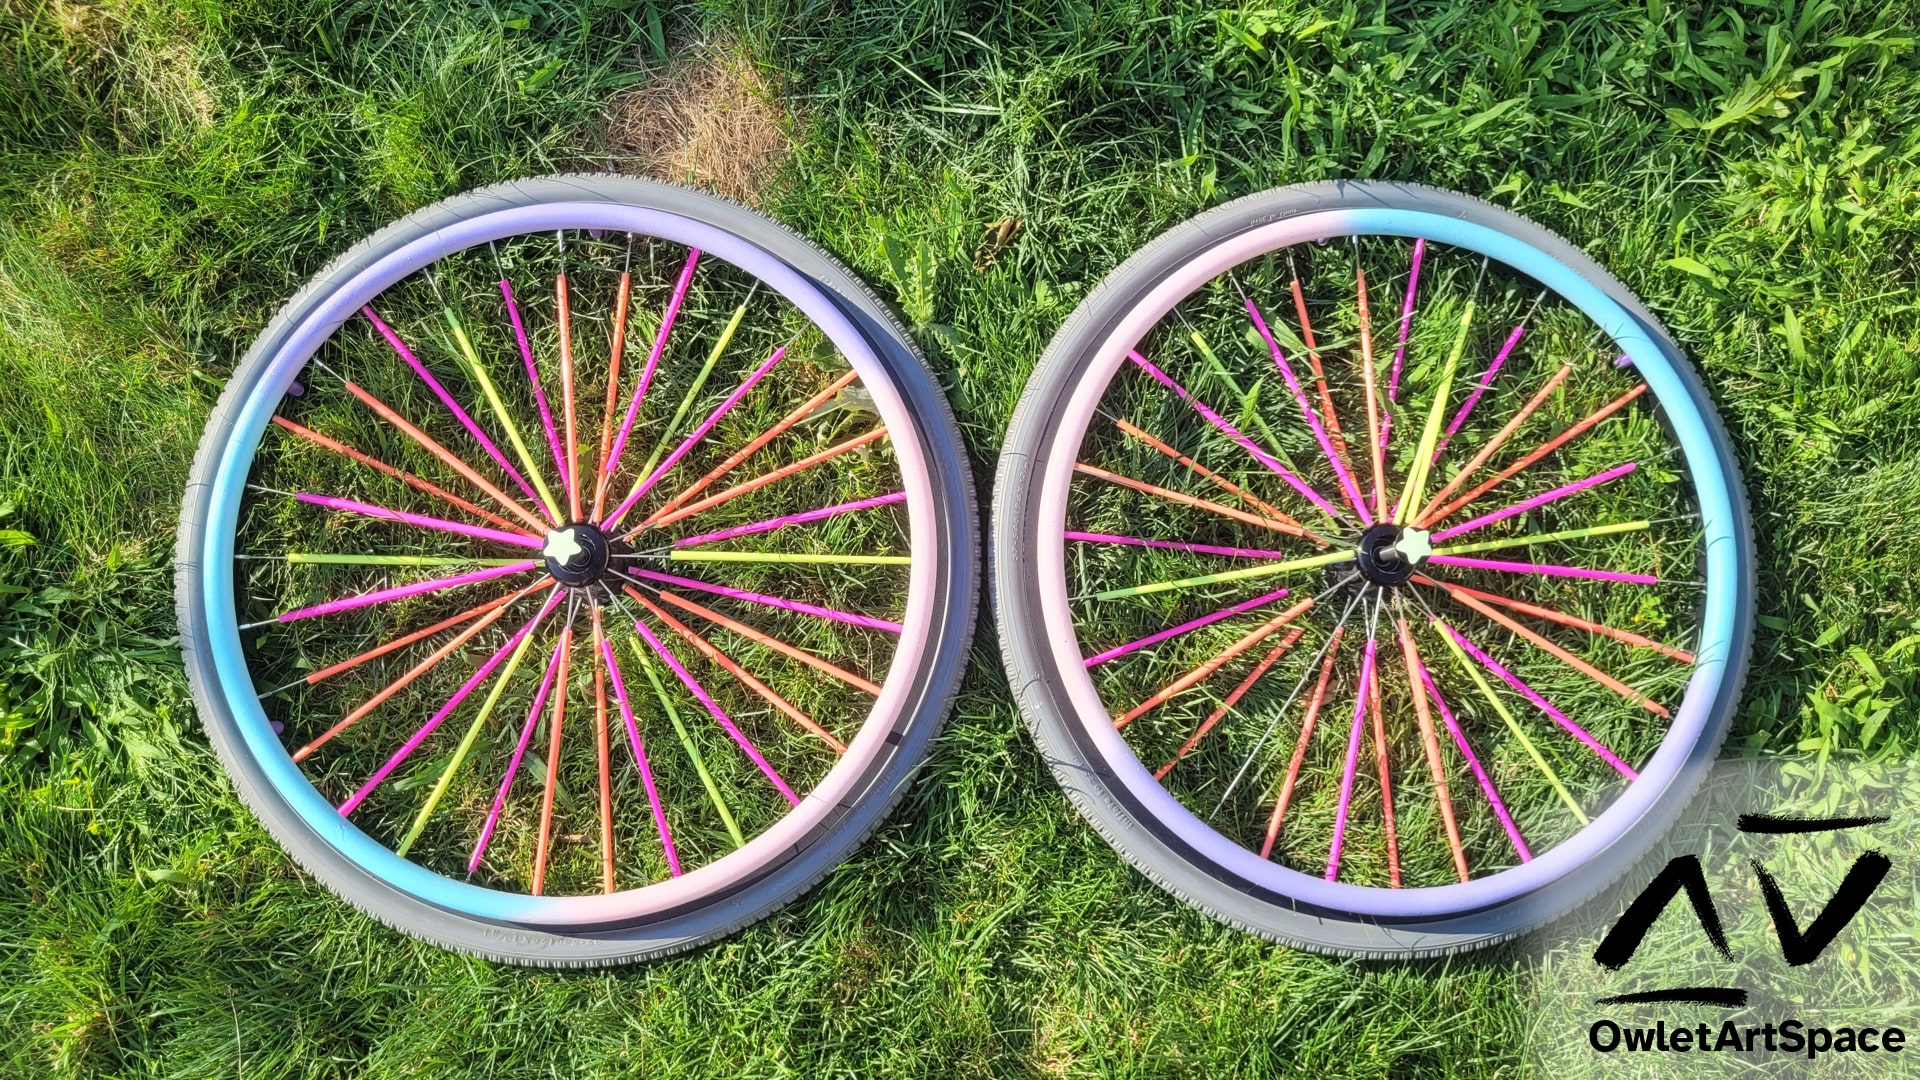 Two wheelchair wheels with fluorescent straws on the spokes, a glow in the dark star on the quick release axle, and a gradient between light pink, lavender, and light blue on the rim.